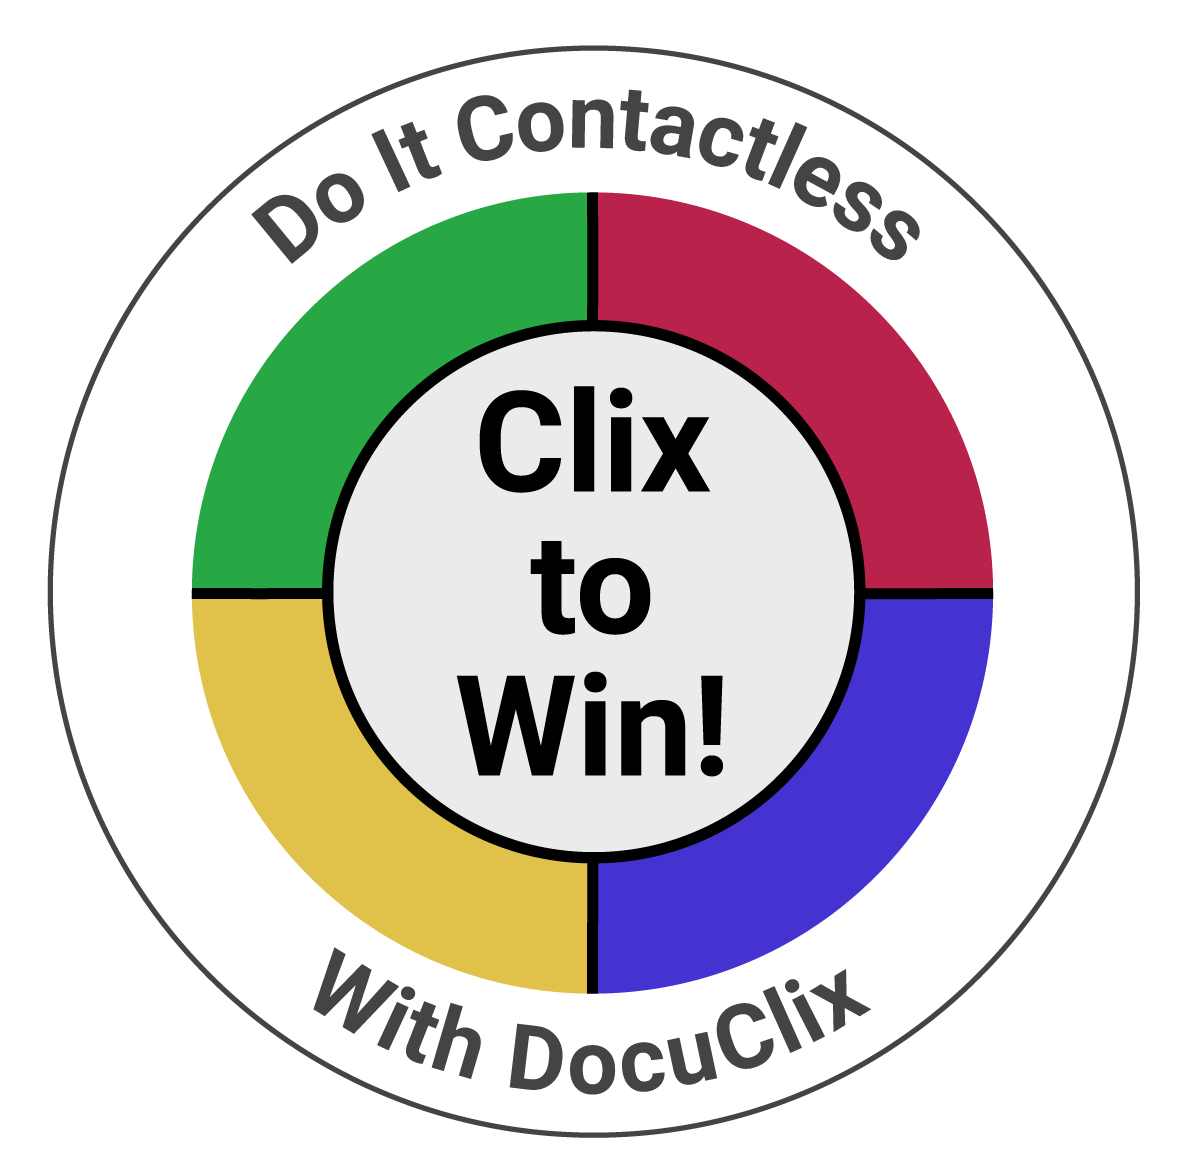 Go Paperless with DocuClix!